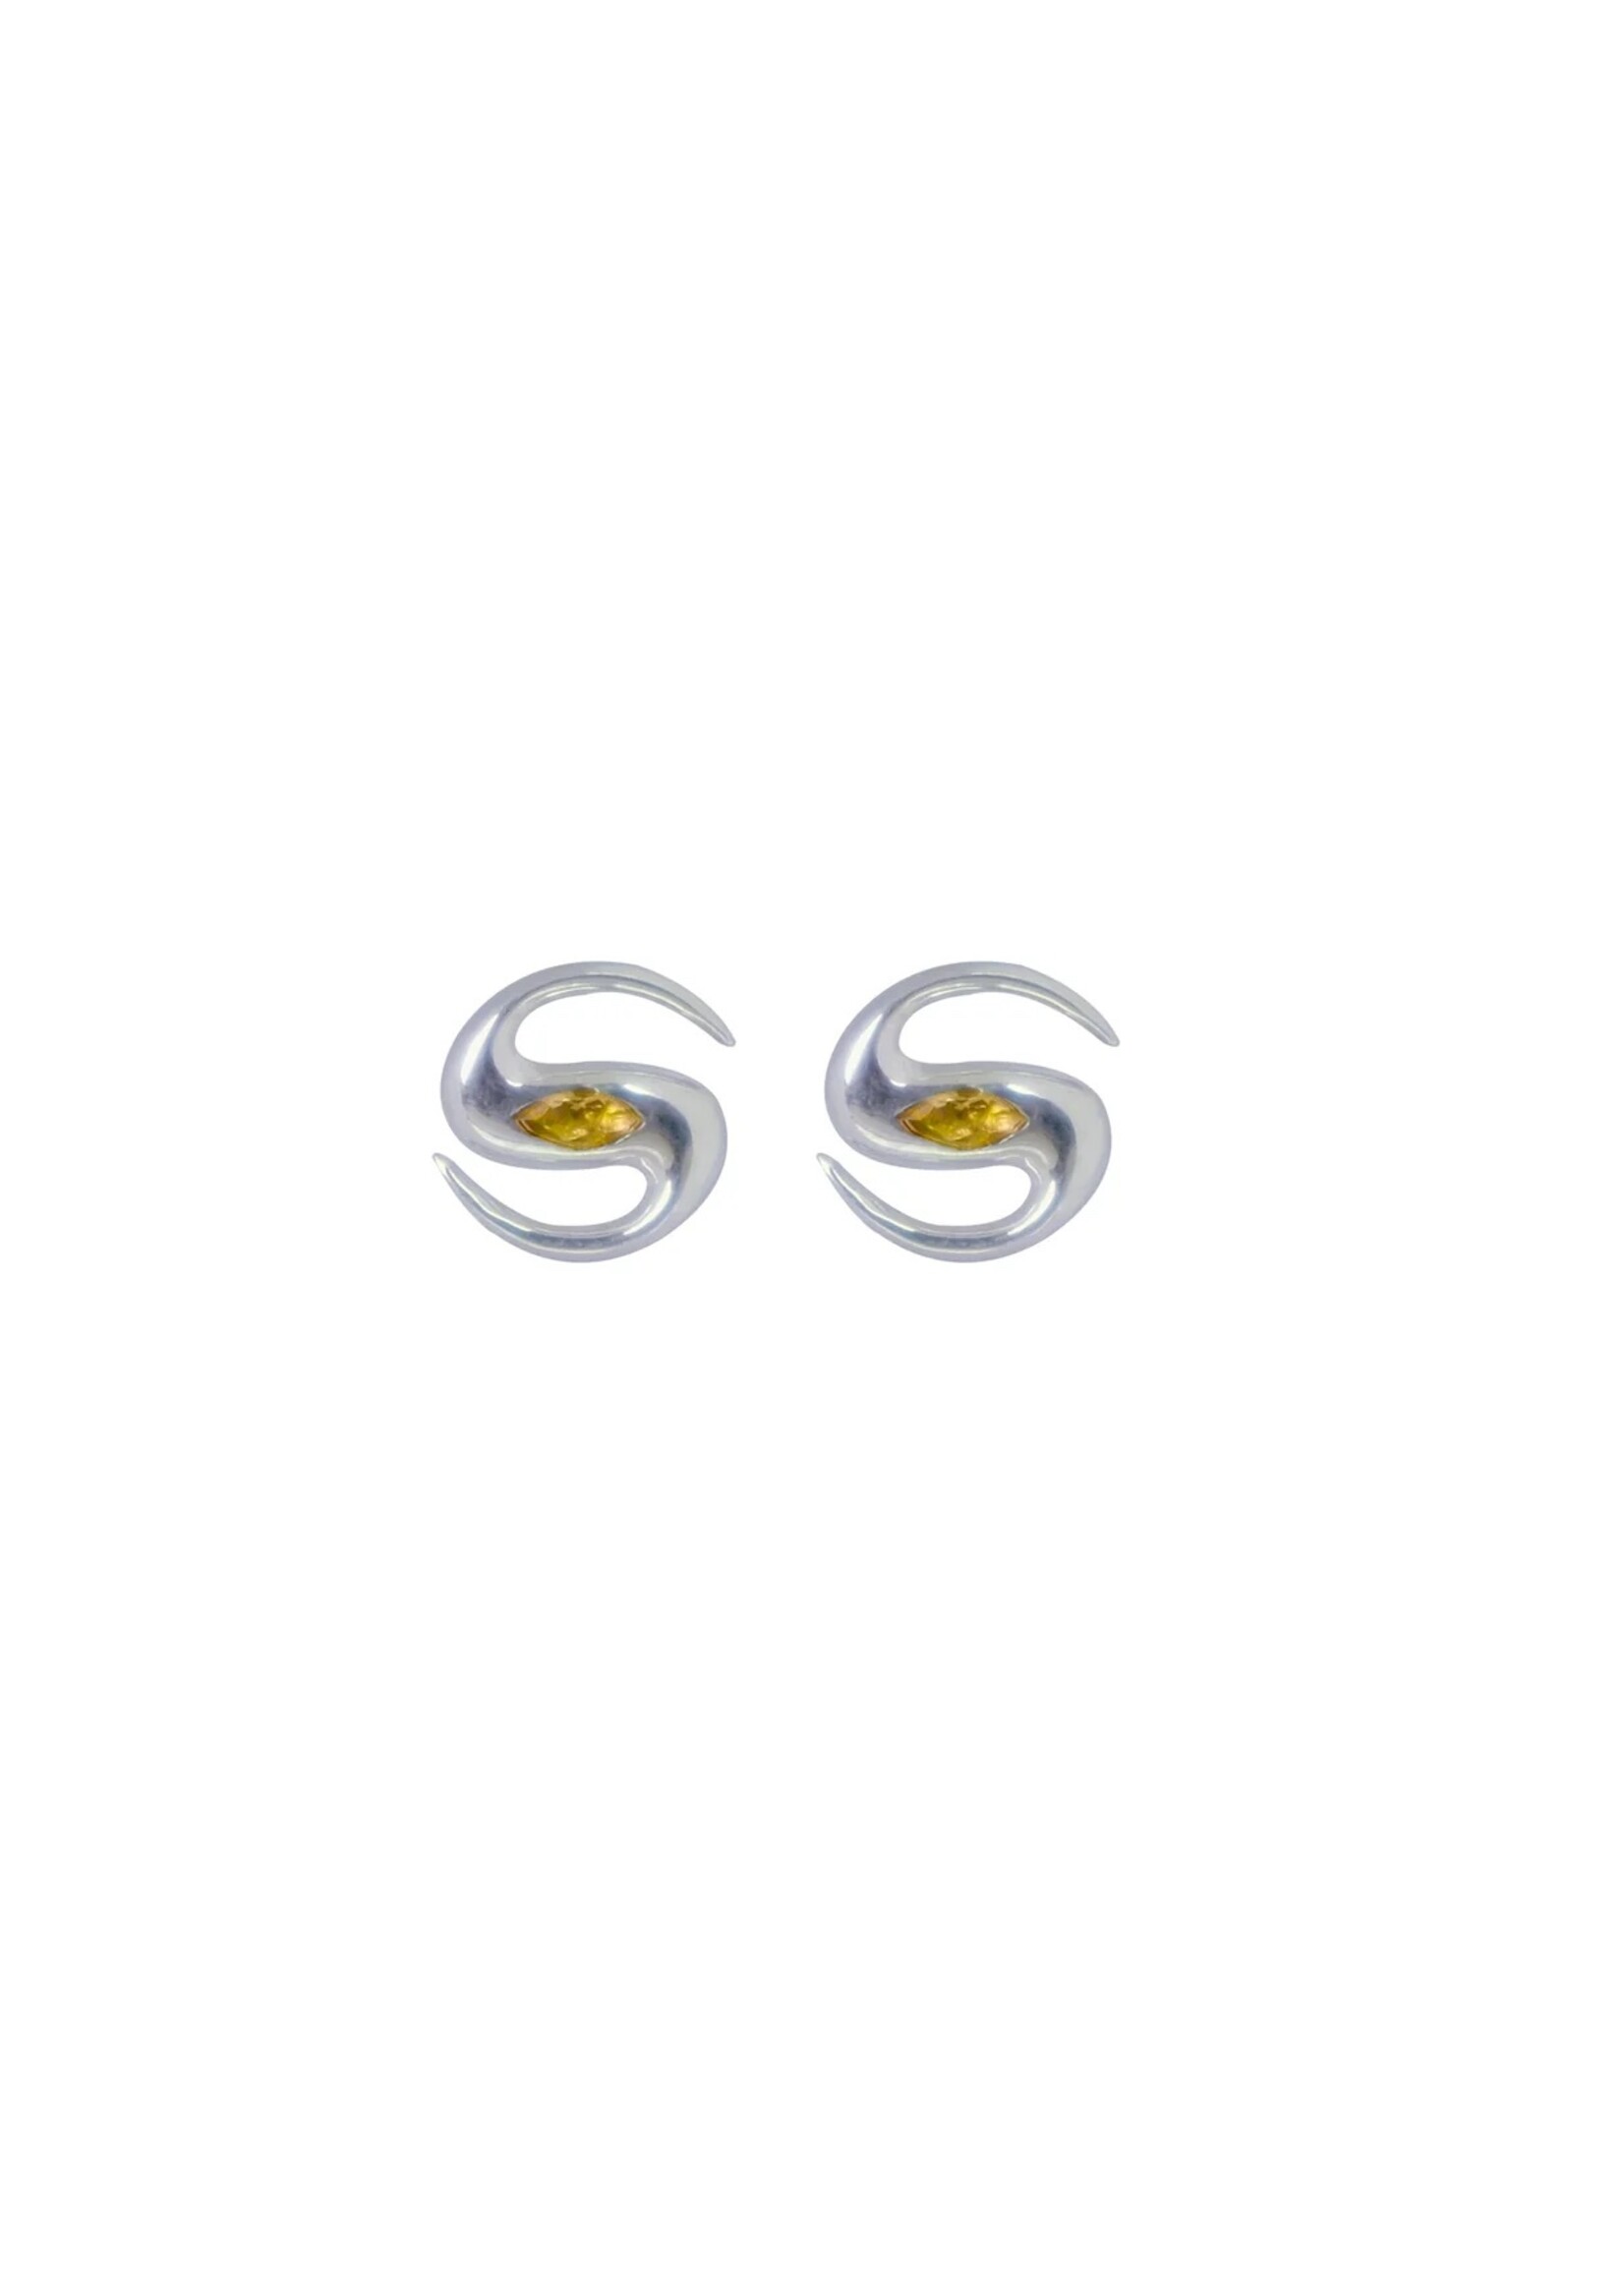 VARON RWND Mini Earrings in Sterling Silver and Citrine